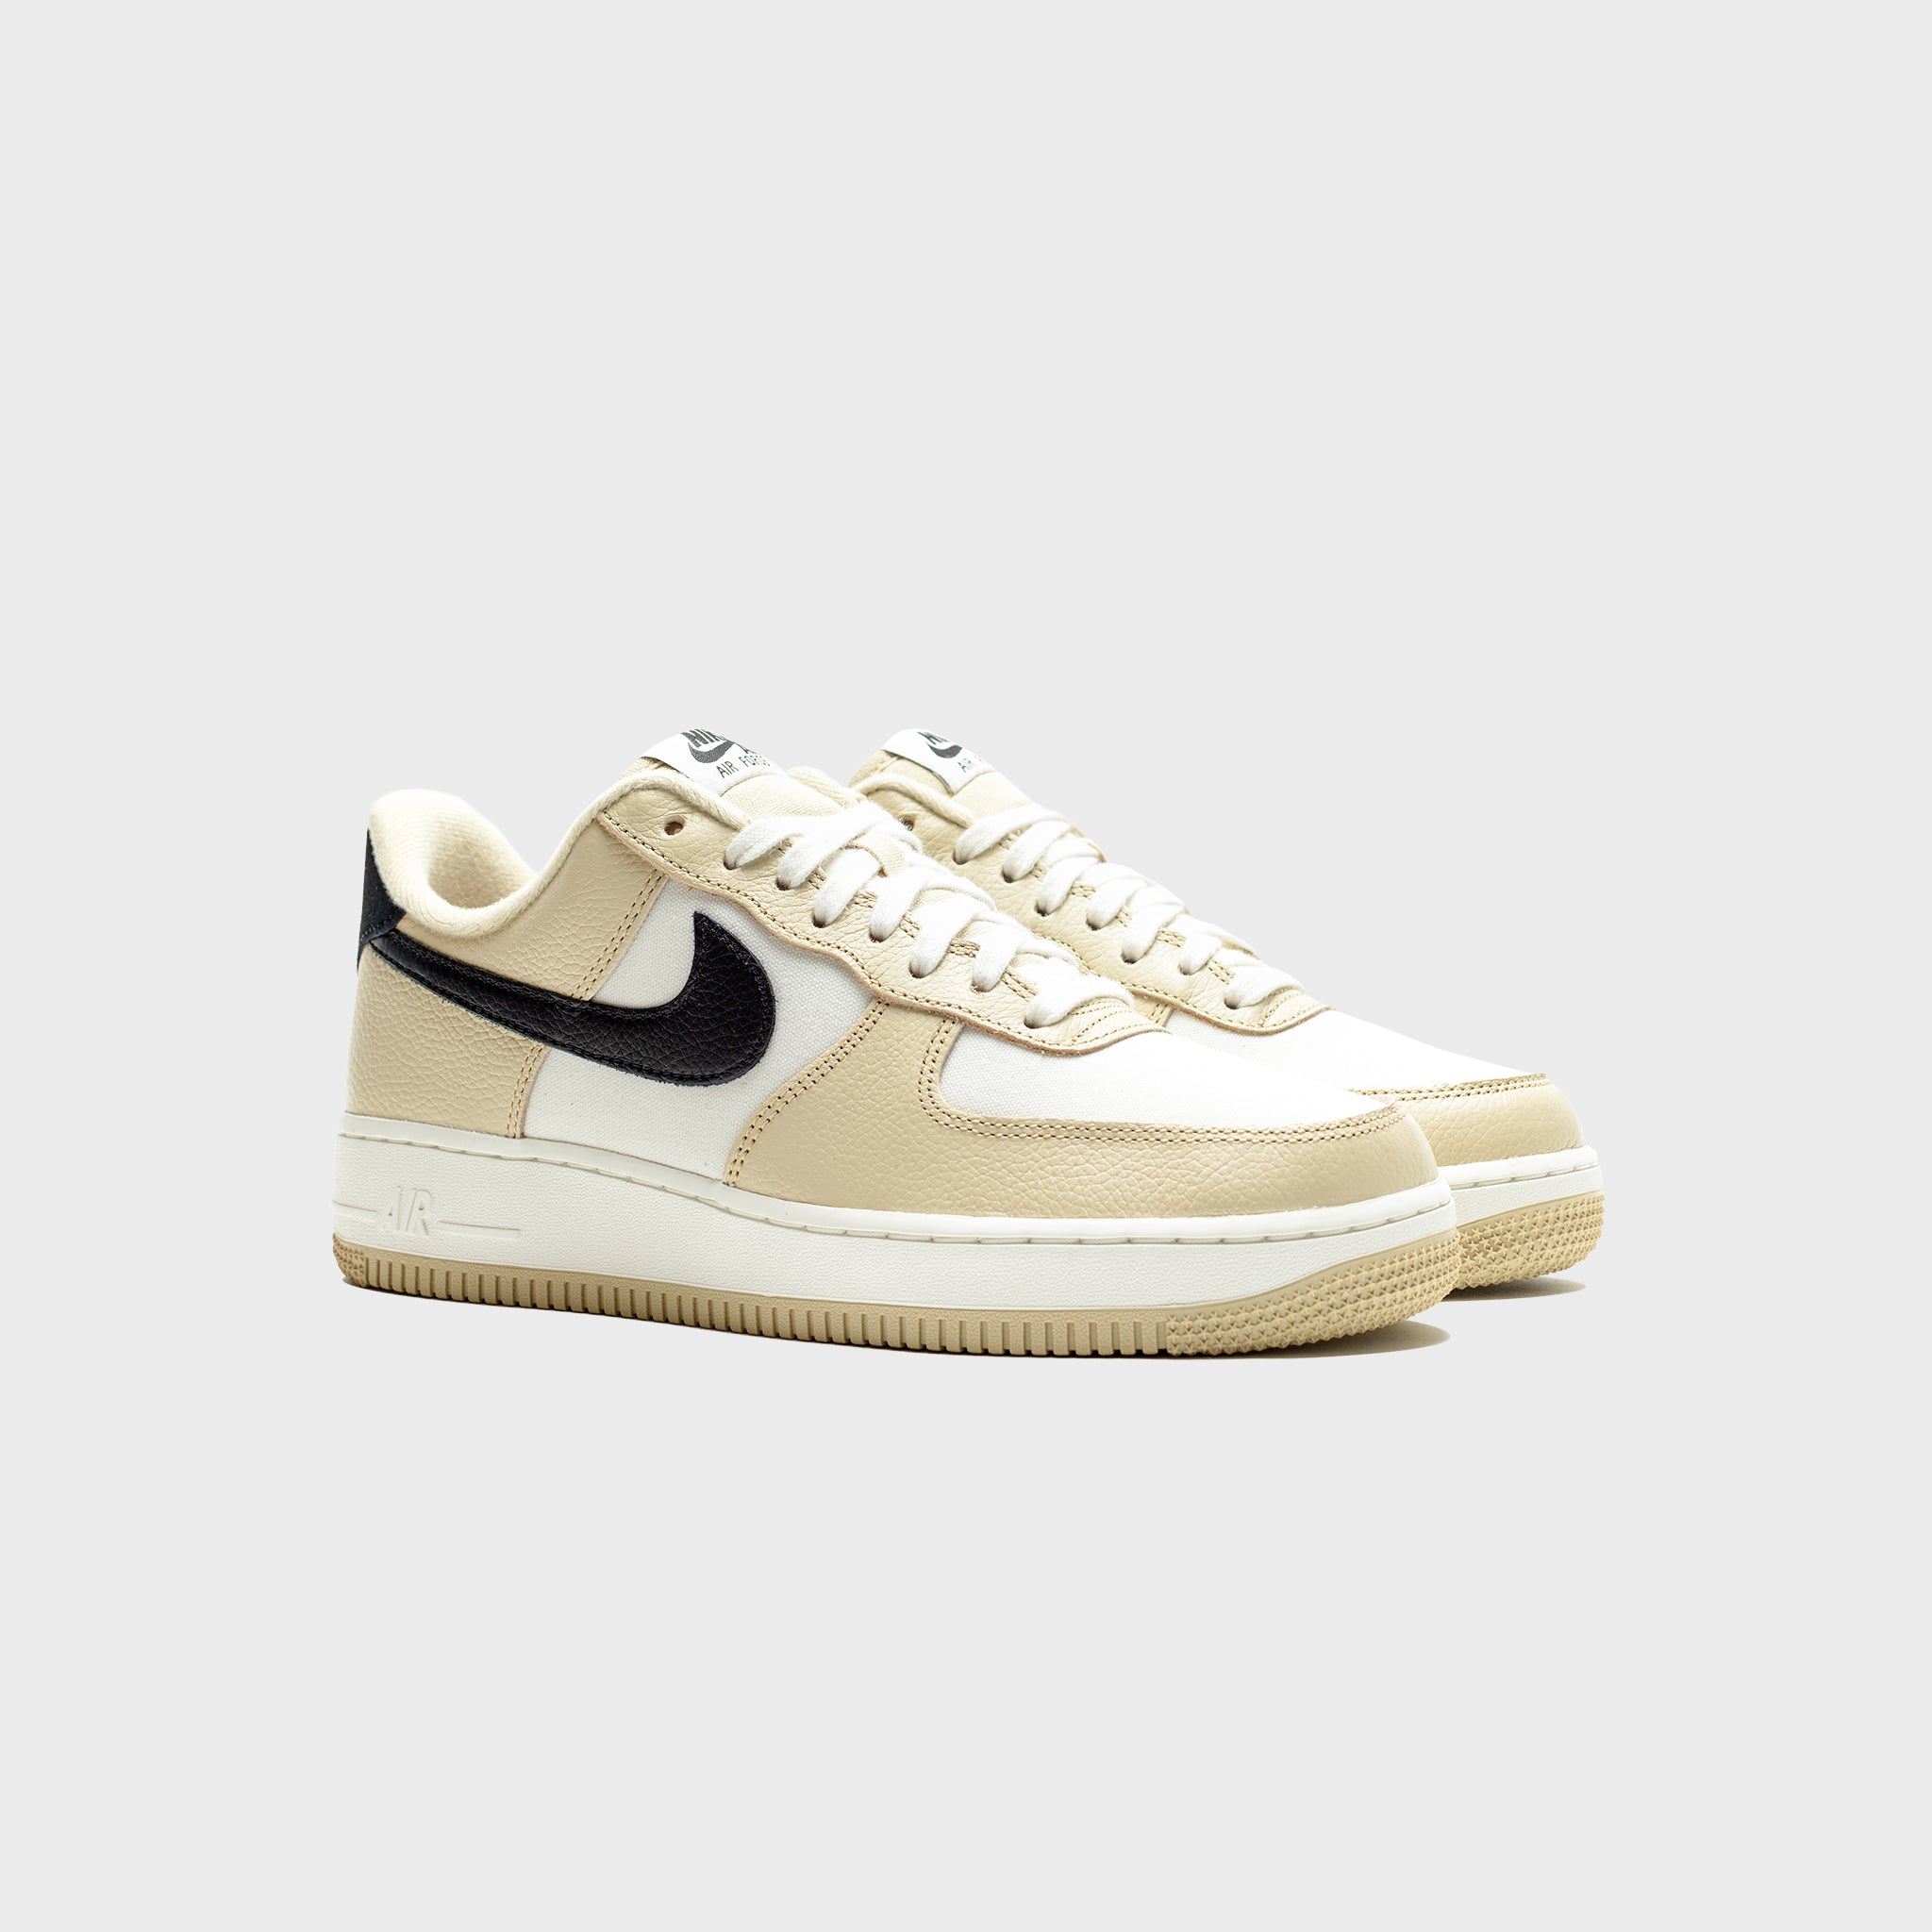 AIR FORCE 1 '07 LX "TEAM GOLD" PACKER SHOES